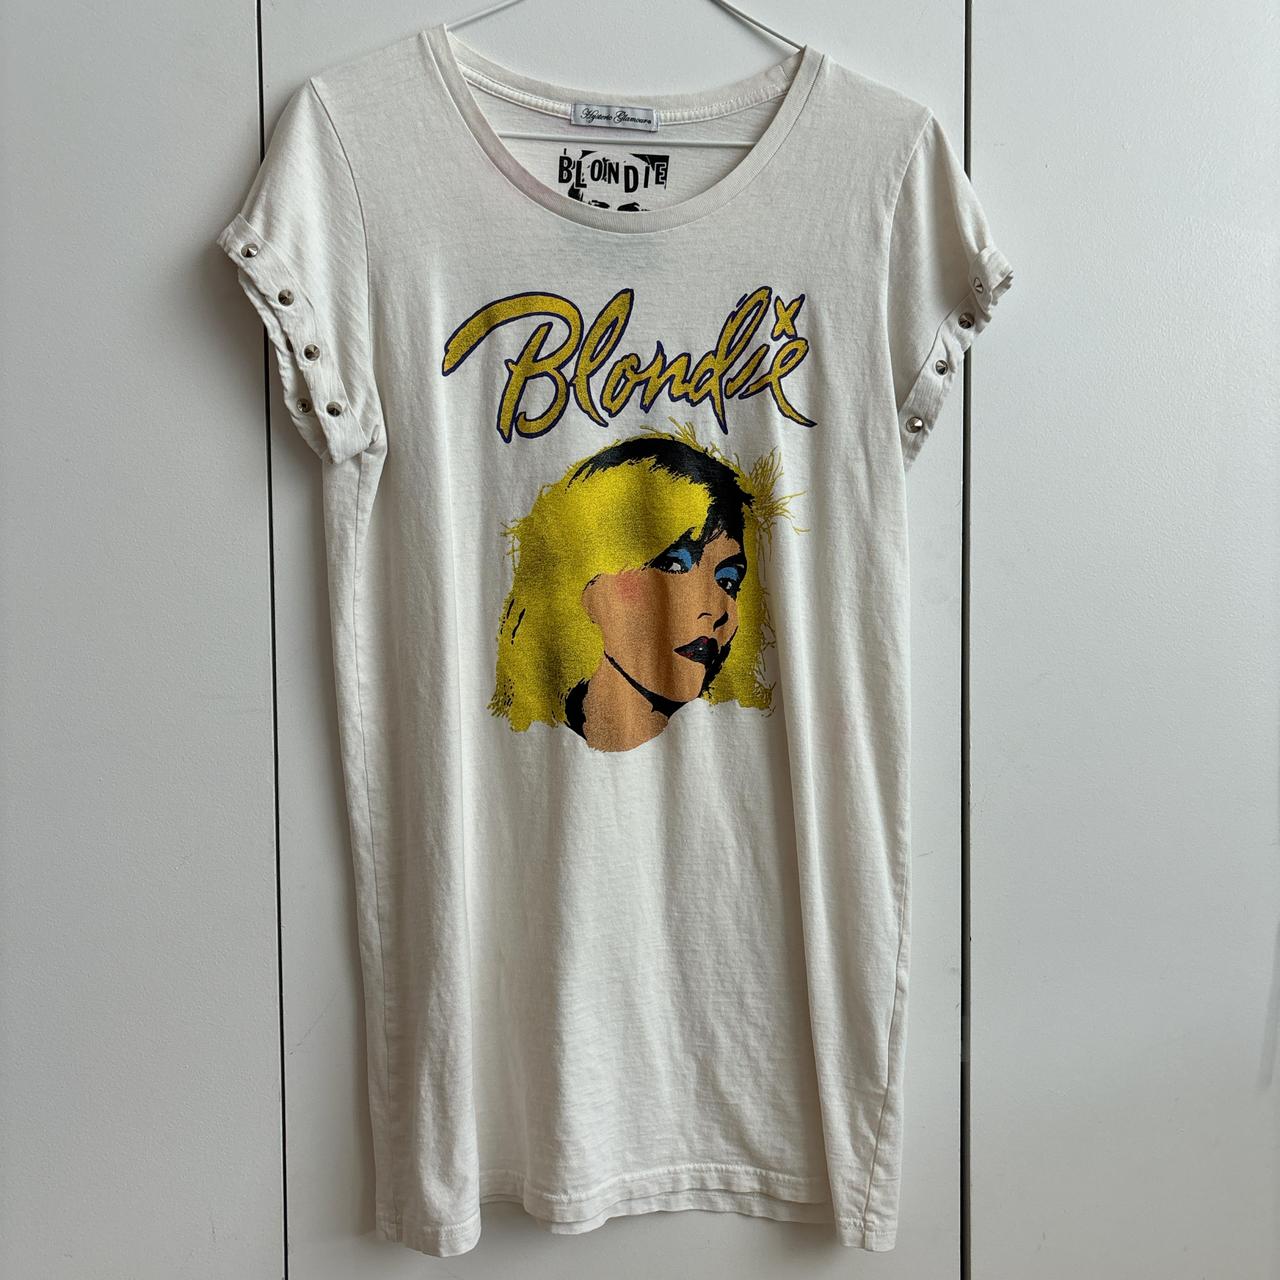 Hysteric glamour blondie long t shirt No size tag - Depop